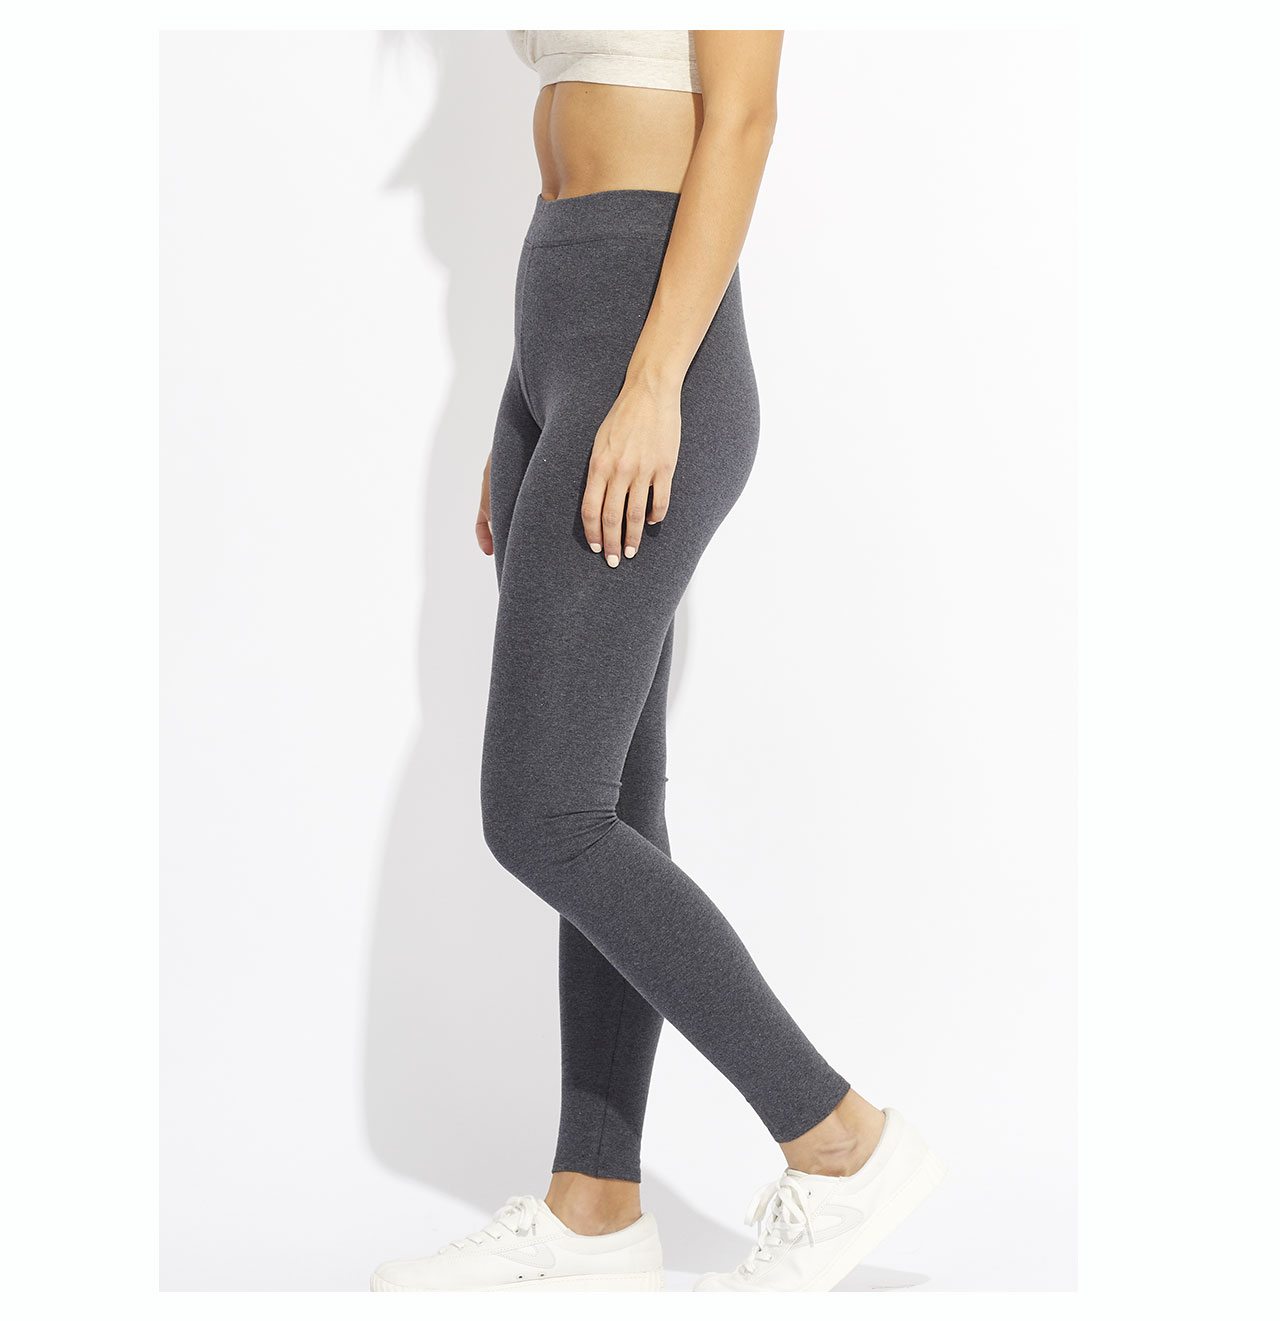 NEW Go-To Leggings + Free shippinga and 20% off orders of $100 or more